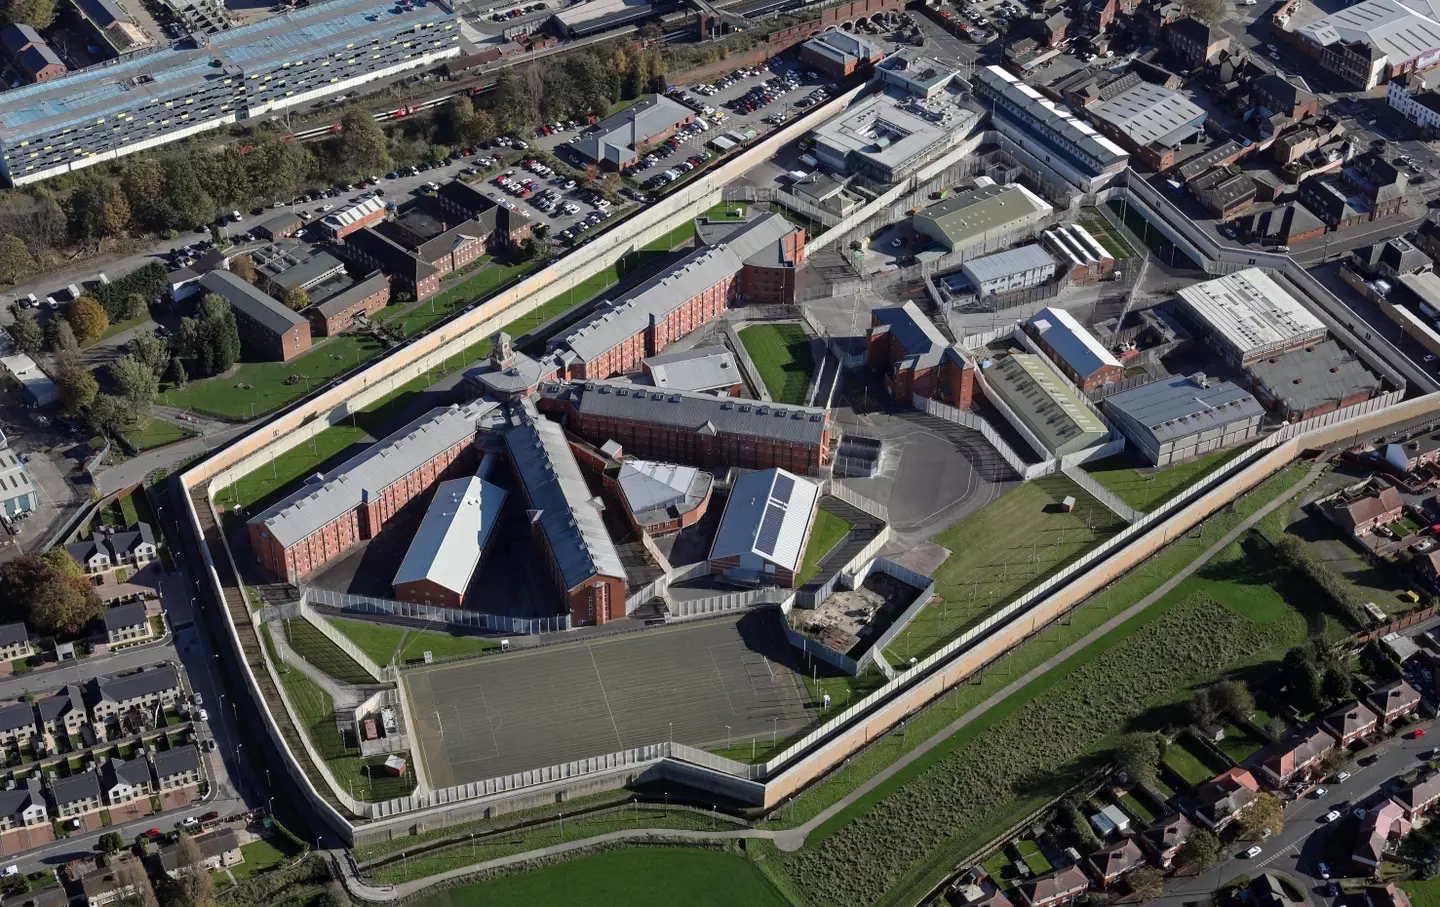 Aerial view of HM Wakefield Prison, where the sexual assaults allegedly occurred.